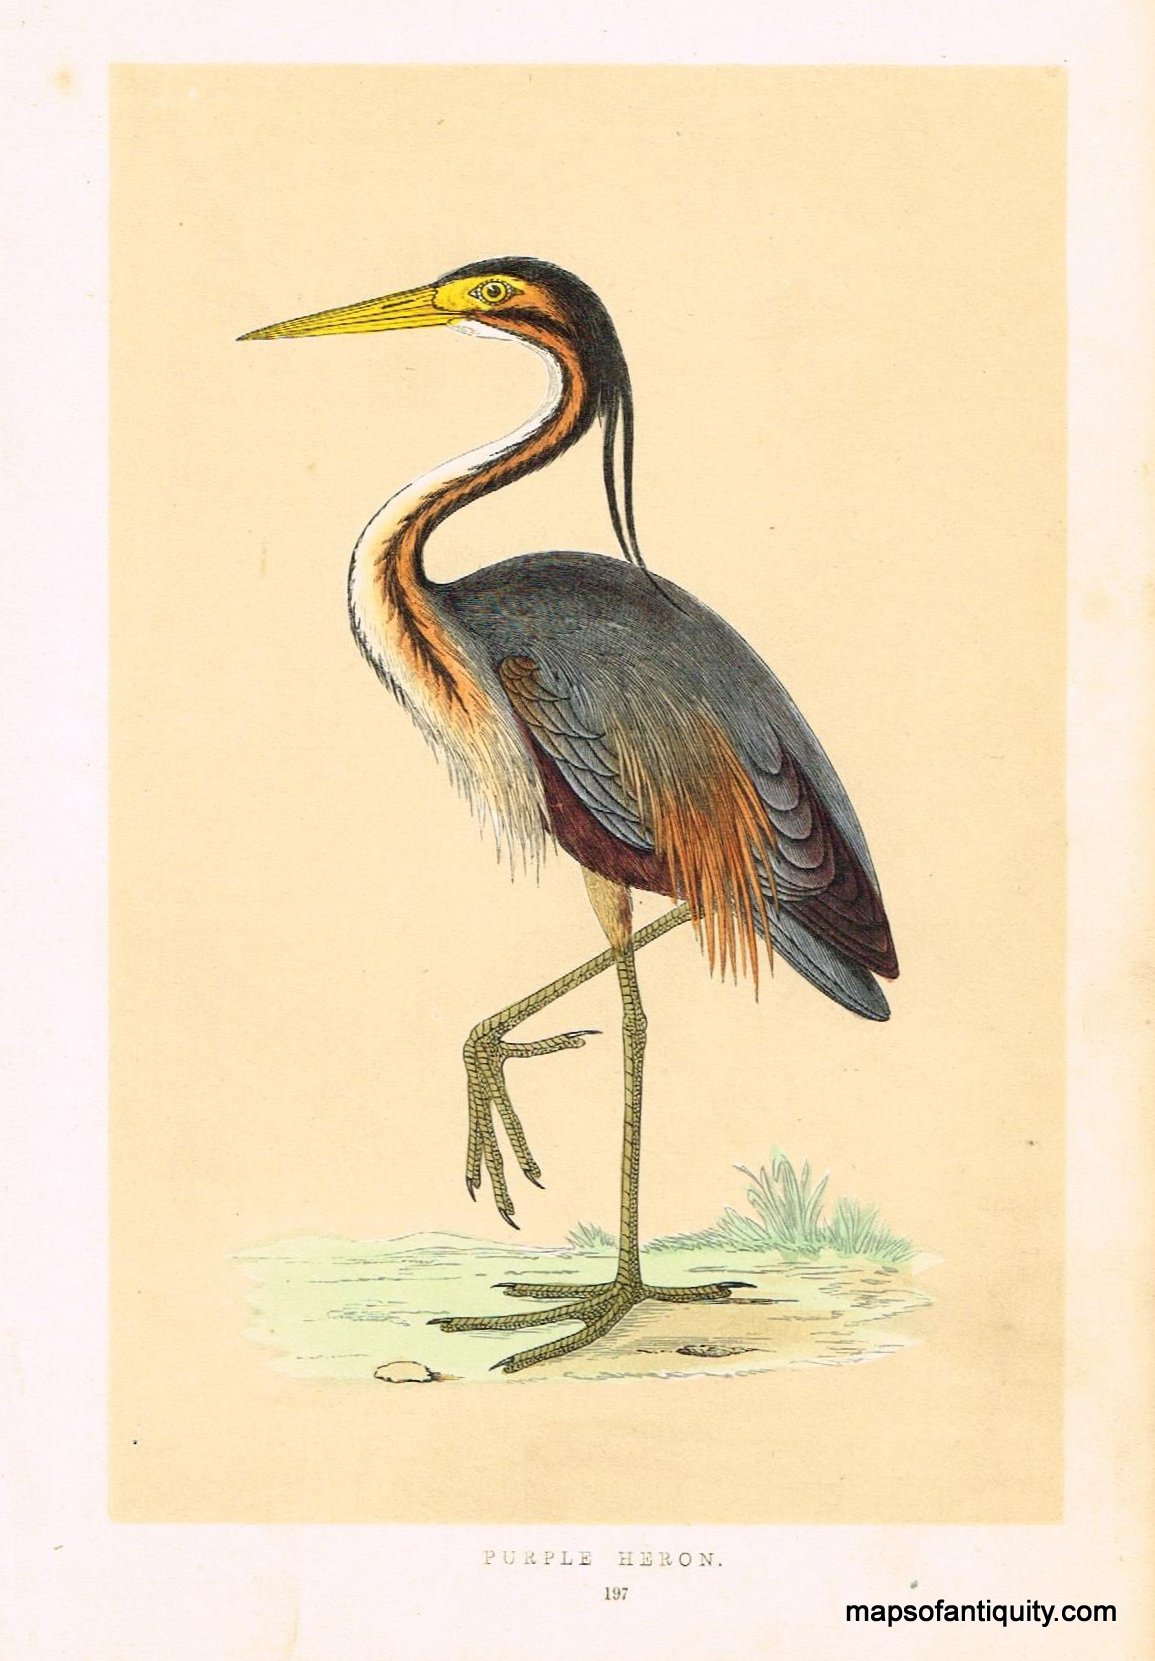 Antique-Hand-Colored-Engraved-Illustration-Purple-Heron-Morris-bird-Natural-History-Birds-1851-Morris-Maps-Of-Antiquity